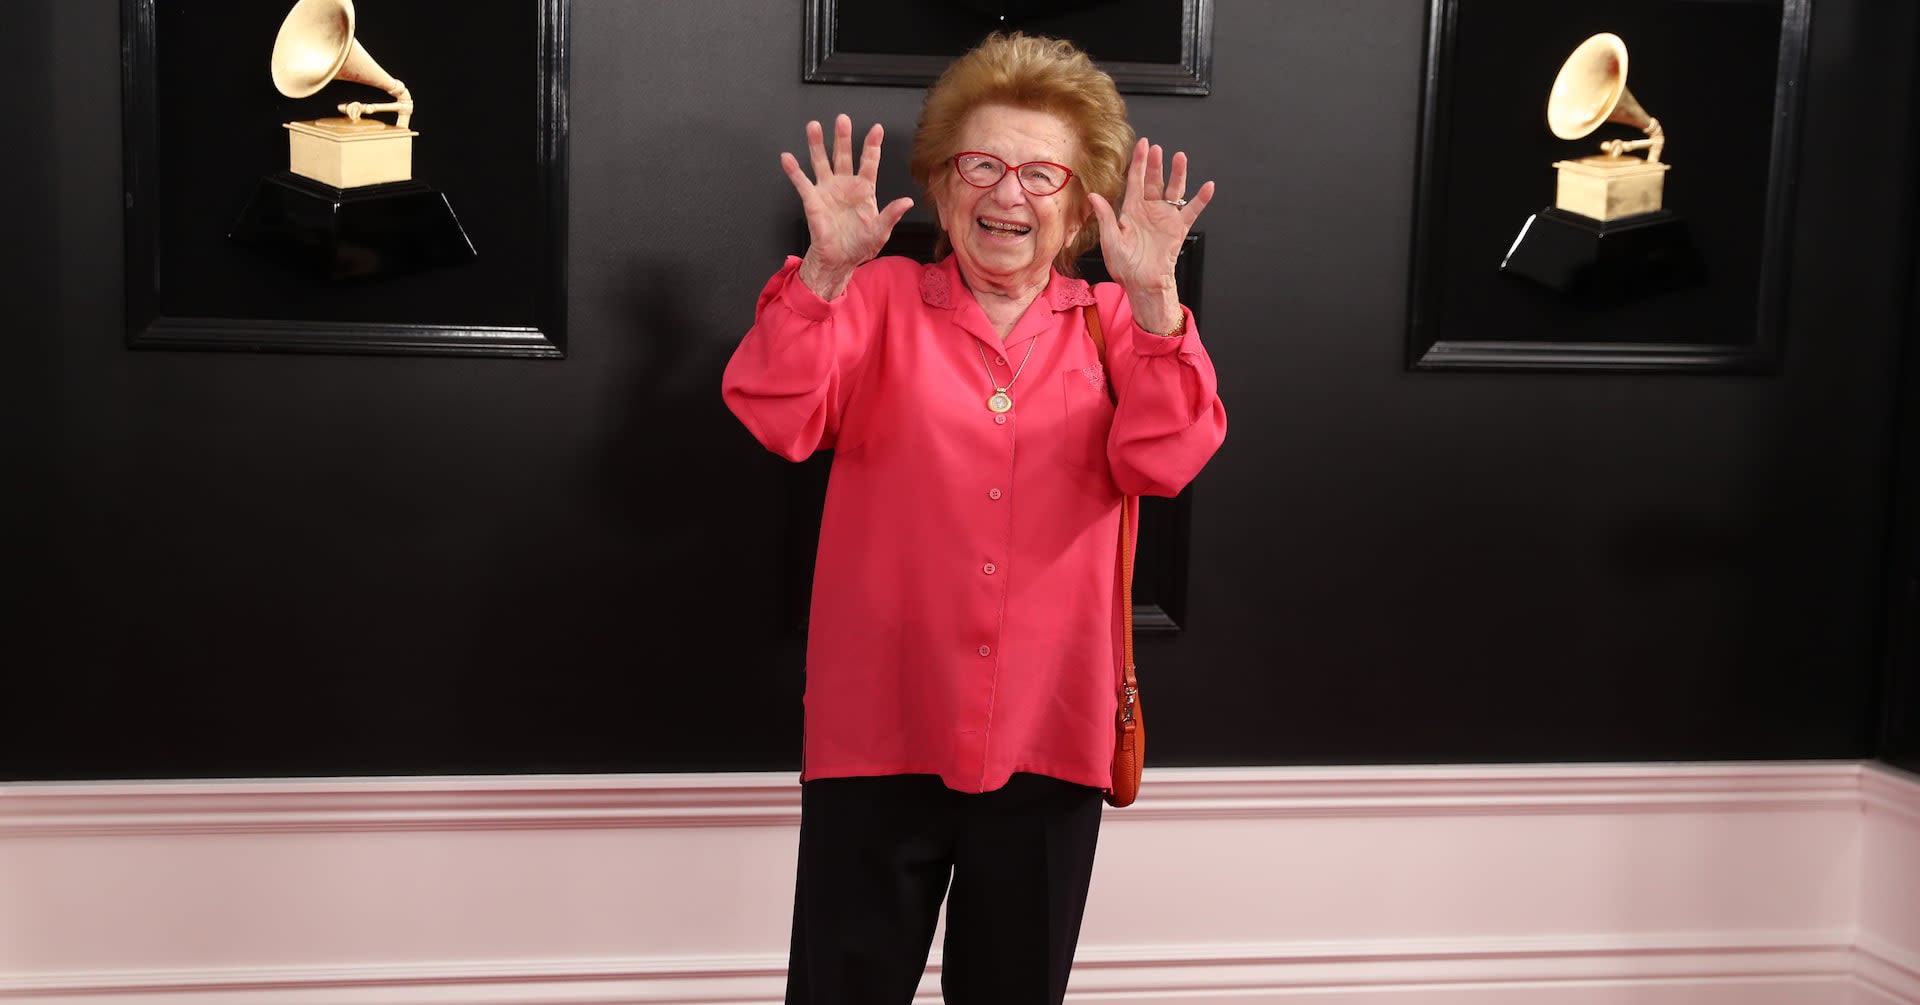 American TV sex therapist Dr Ruth dies at 96, Washington Post reports